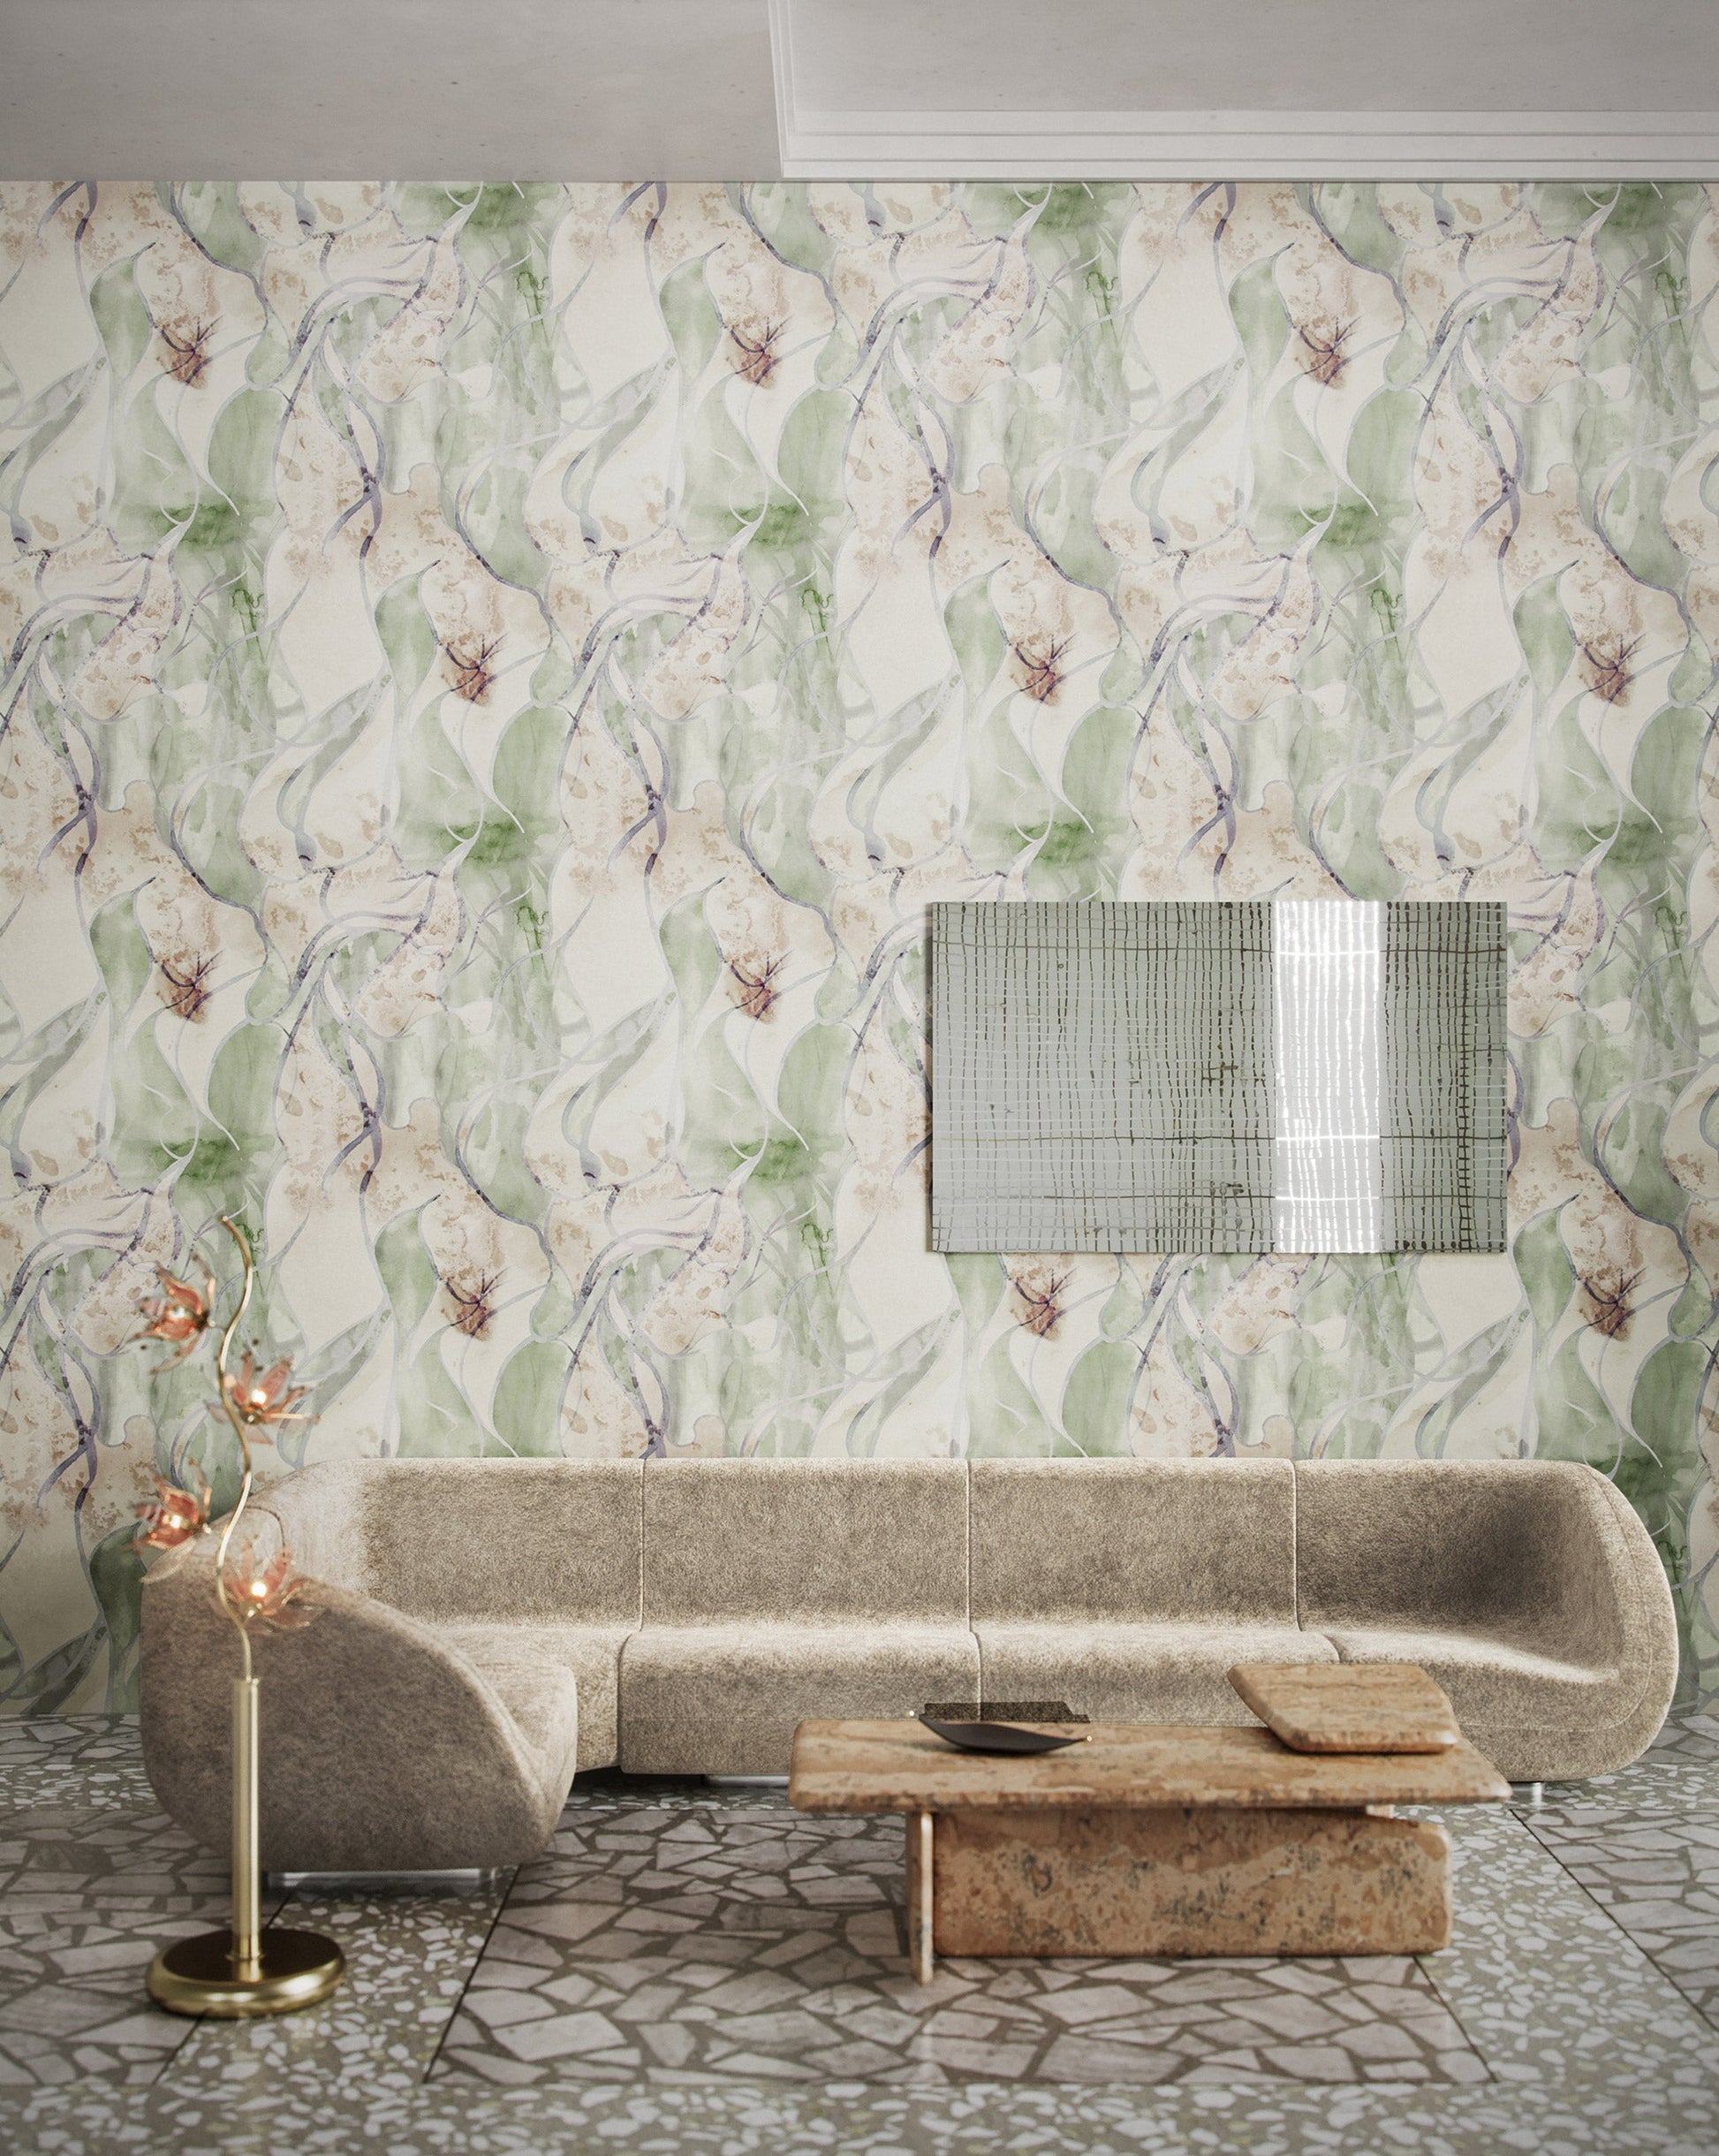 Eskayel's Hibiscus Lily Tourmaline wallpaper is a palette of green and beige installed in a living room.